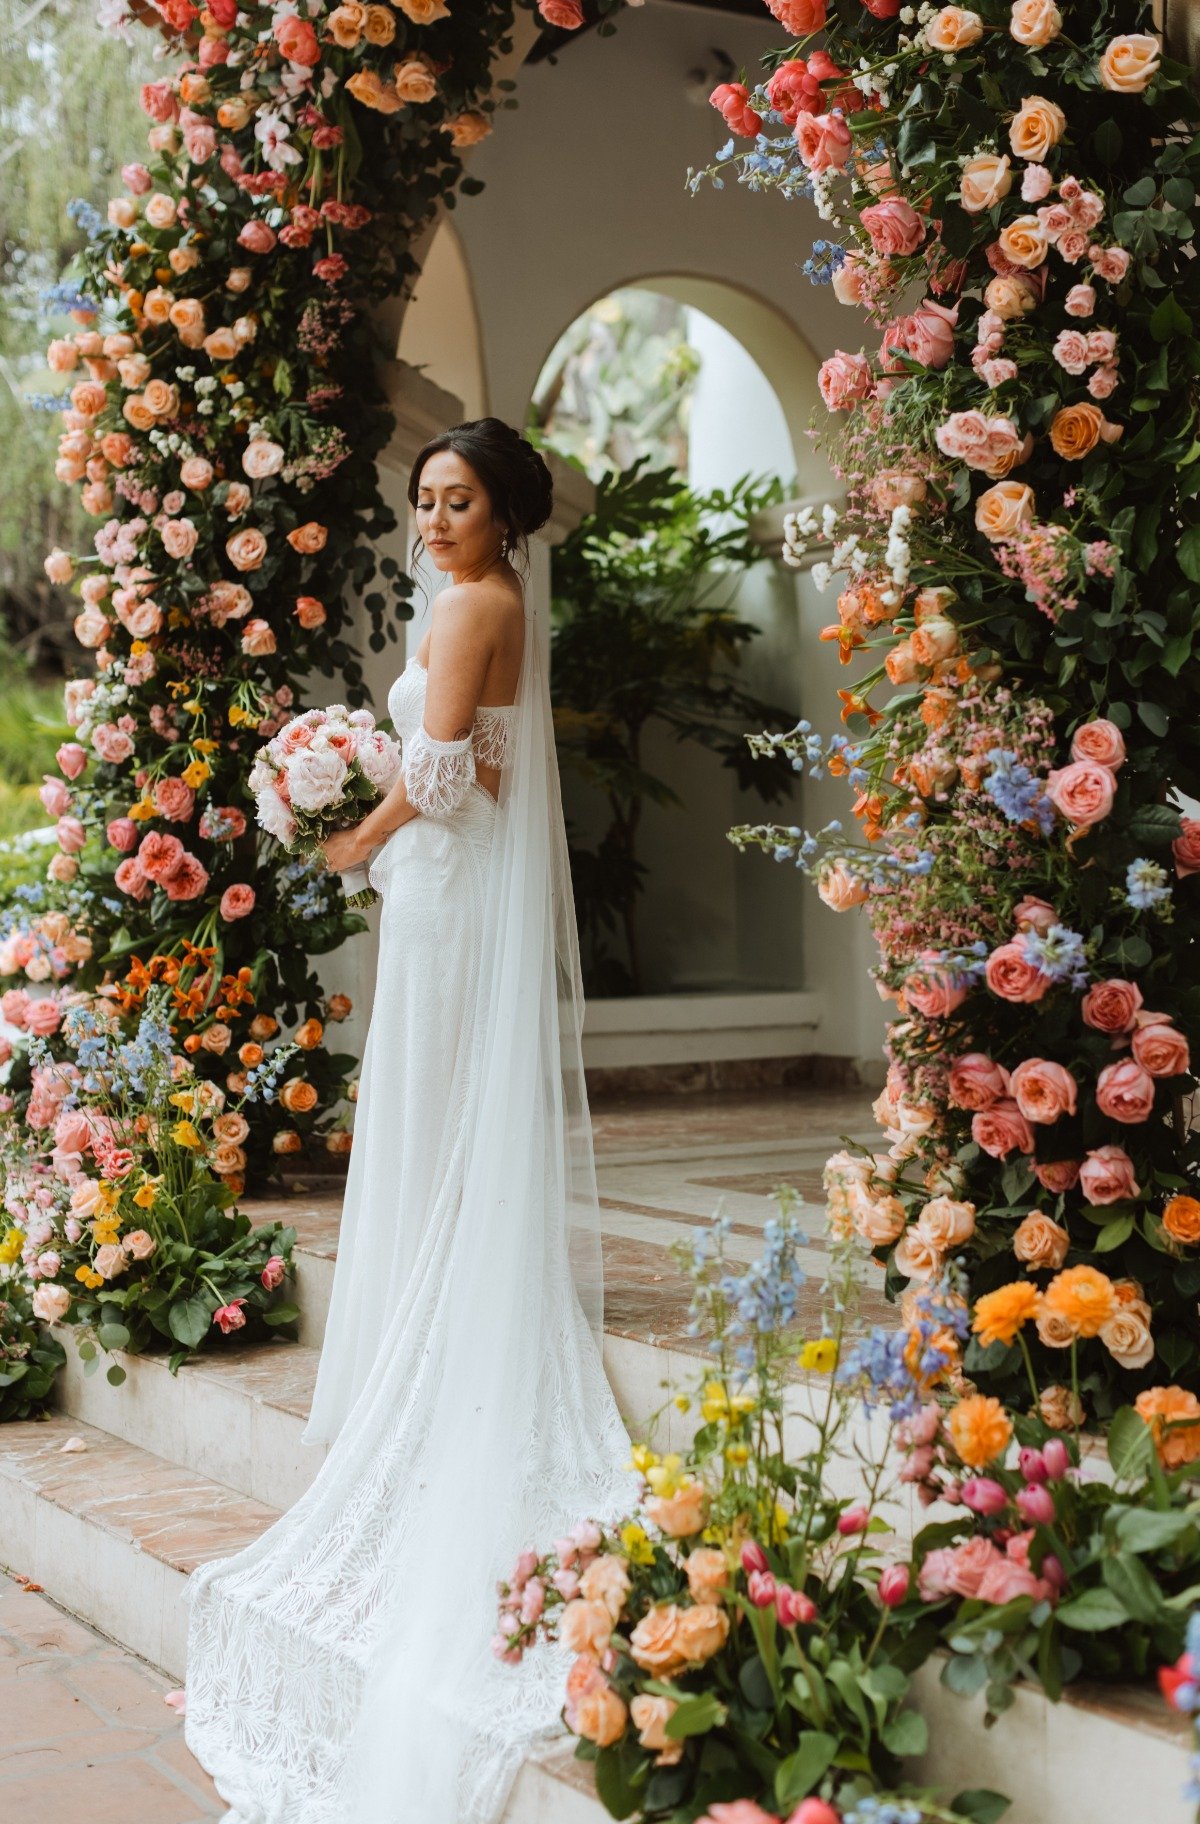 A bride in a white dress is standing under a floral archway.